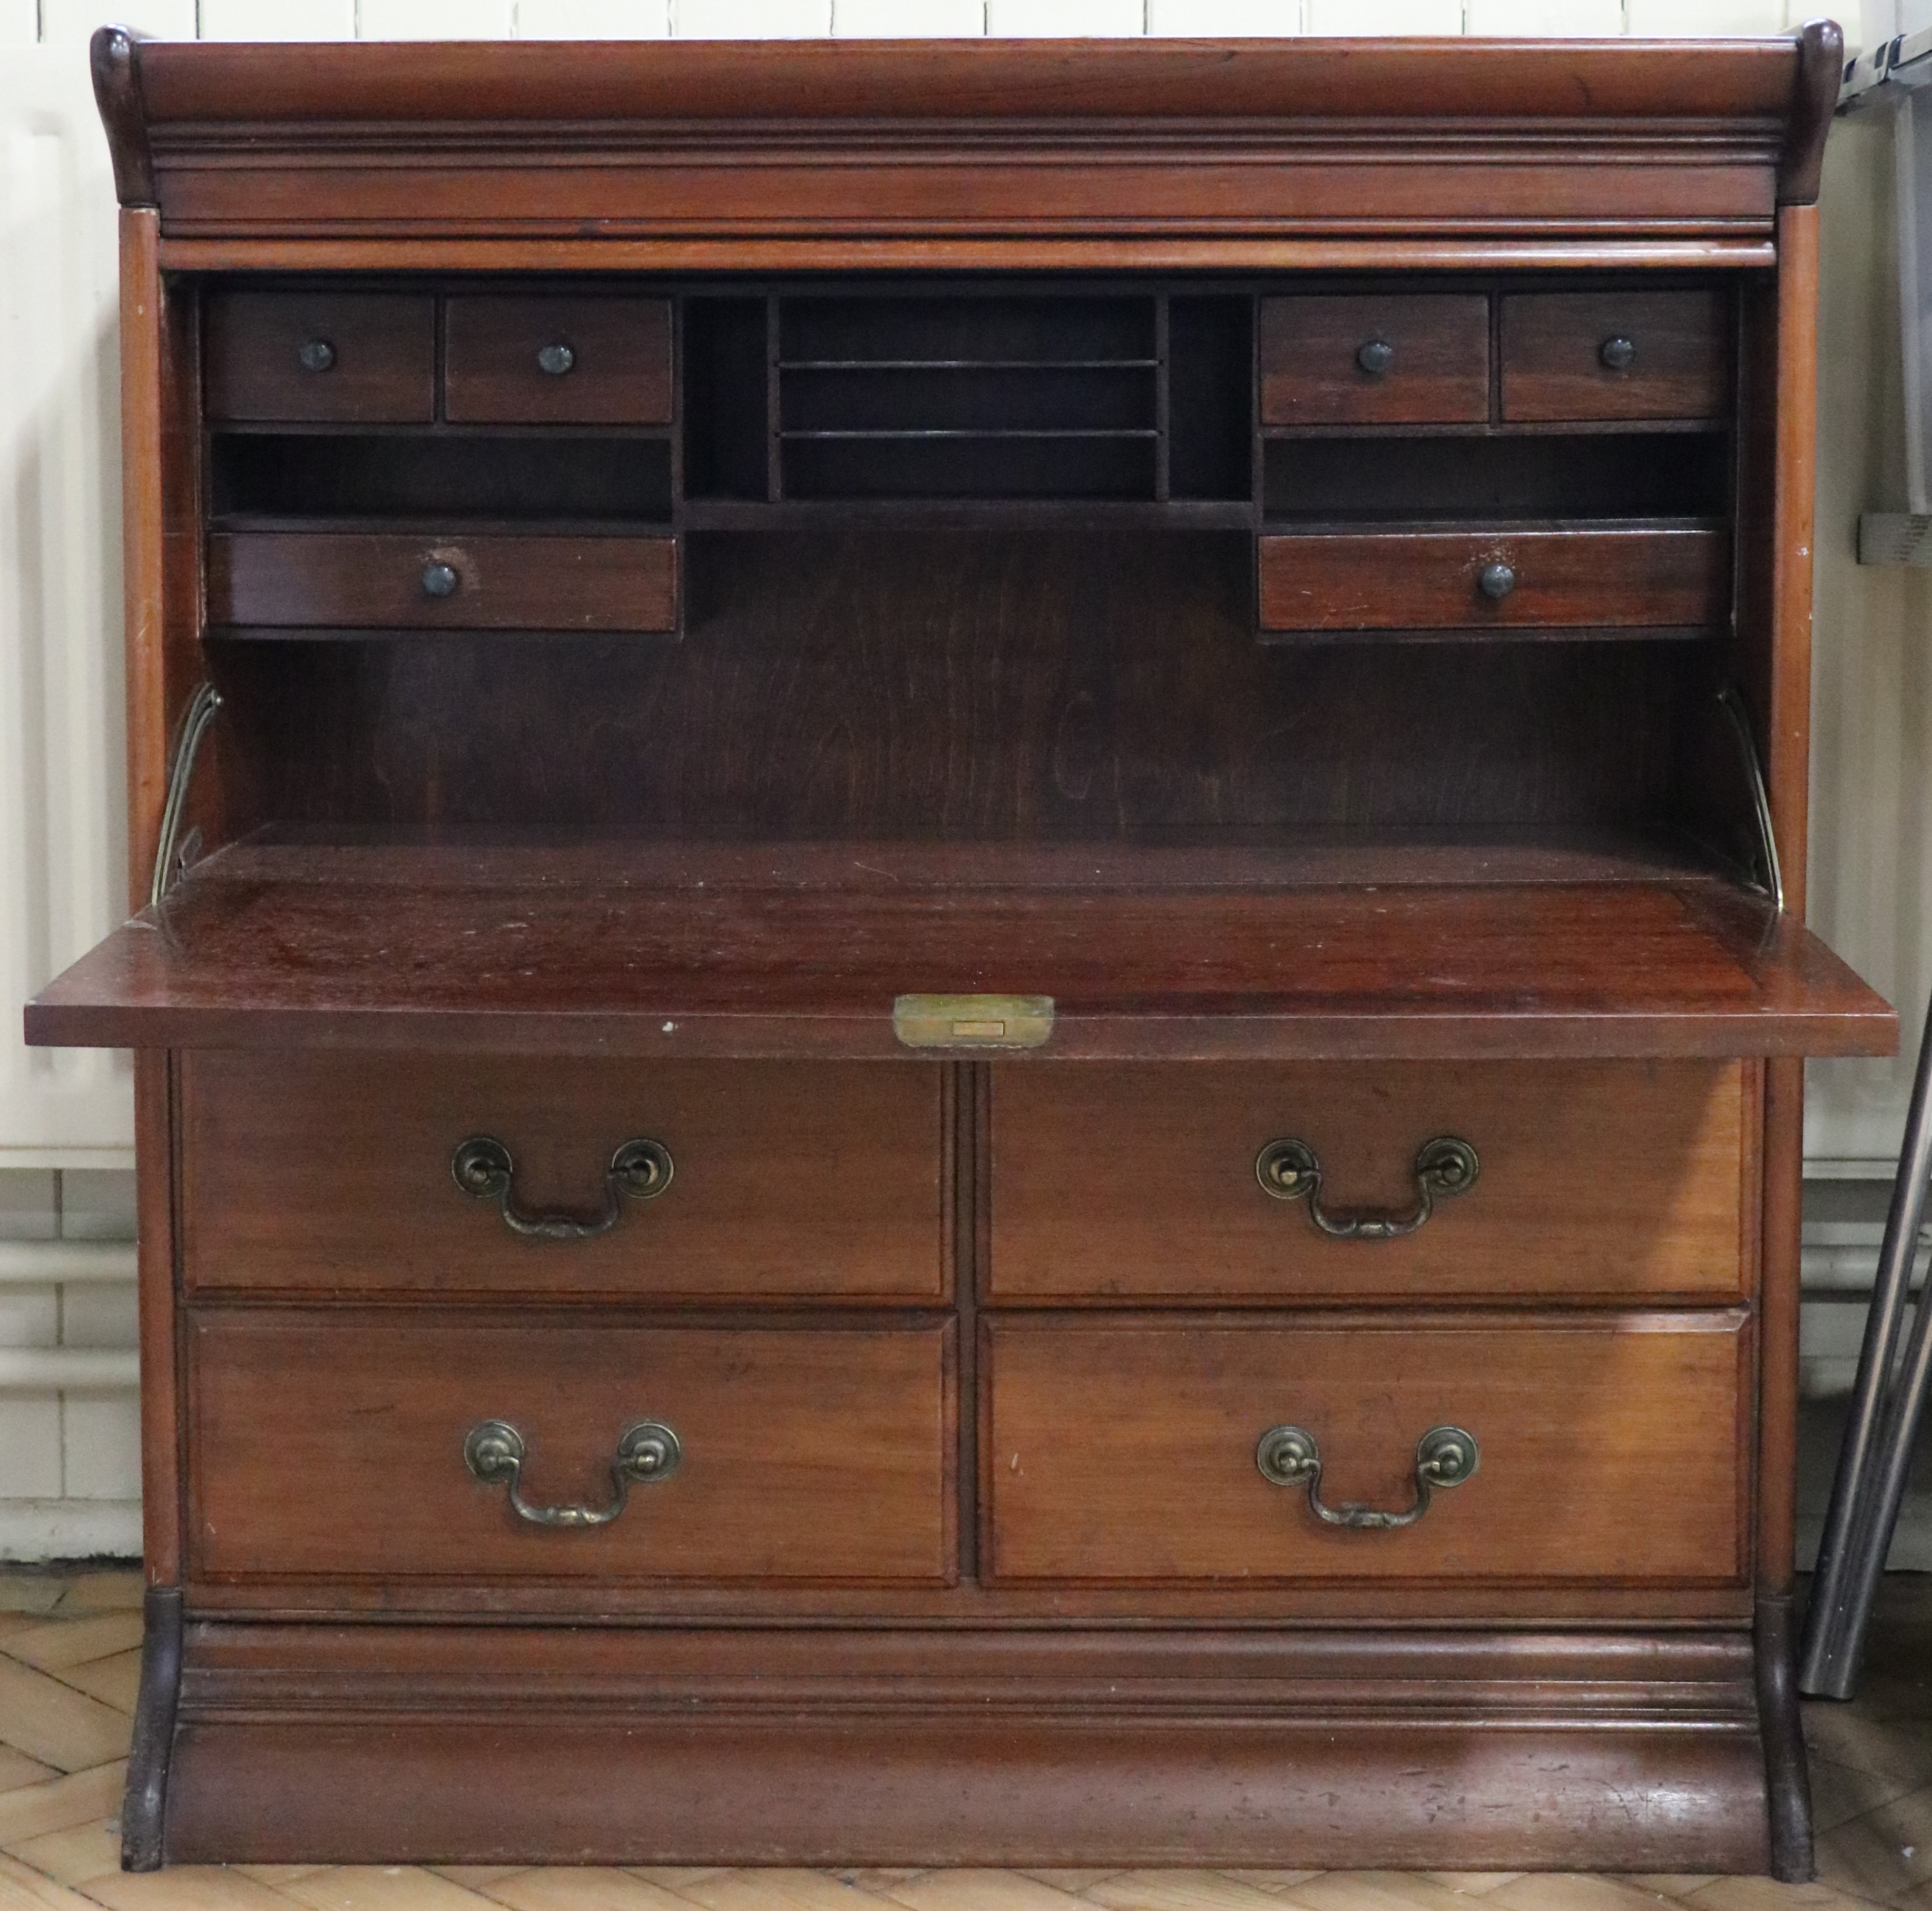 A 1920s Globe-Wernicke mahogany sectional pediment, fall-front bureau stage, drawers and base - Image 2 of 4